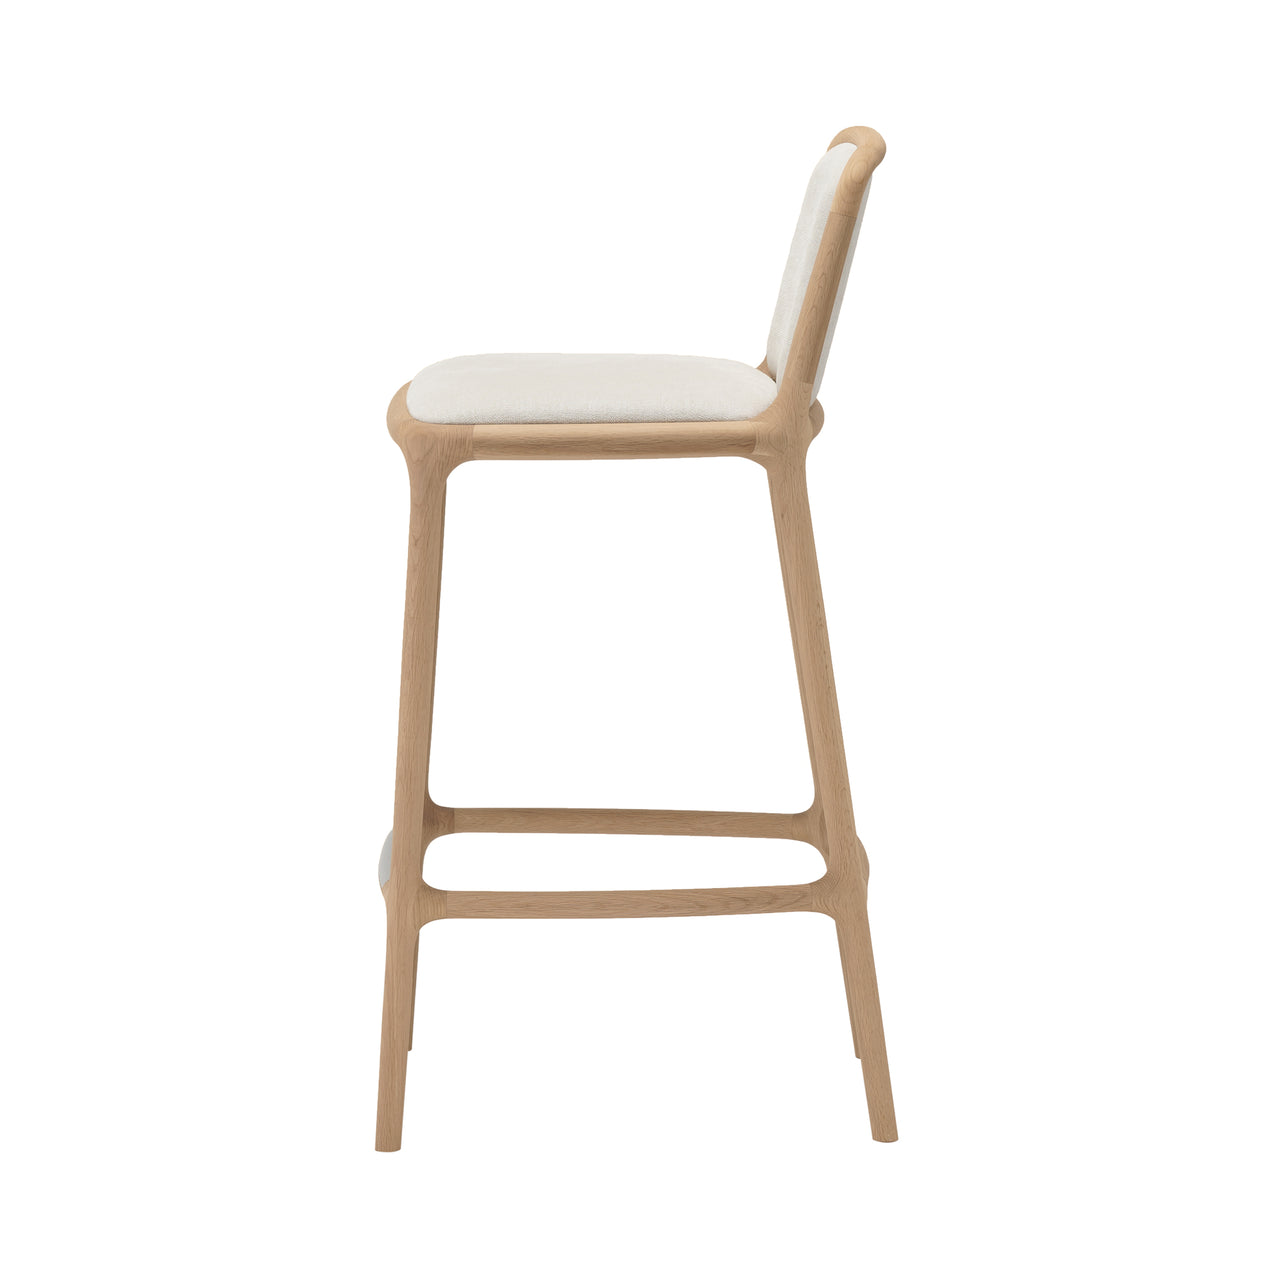 Norman Foster Stool NF-BS02: Pure Oak